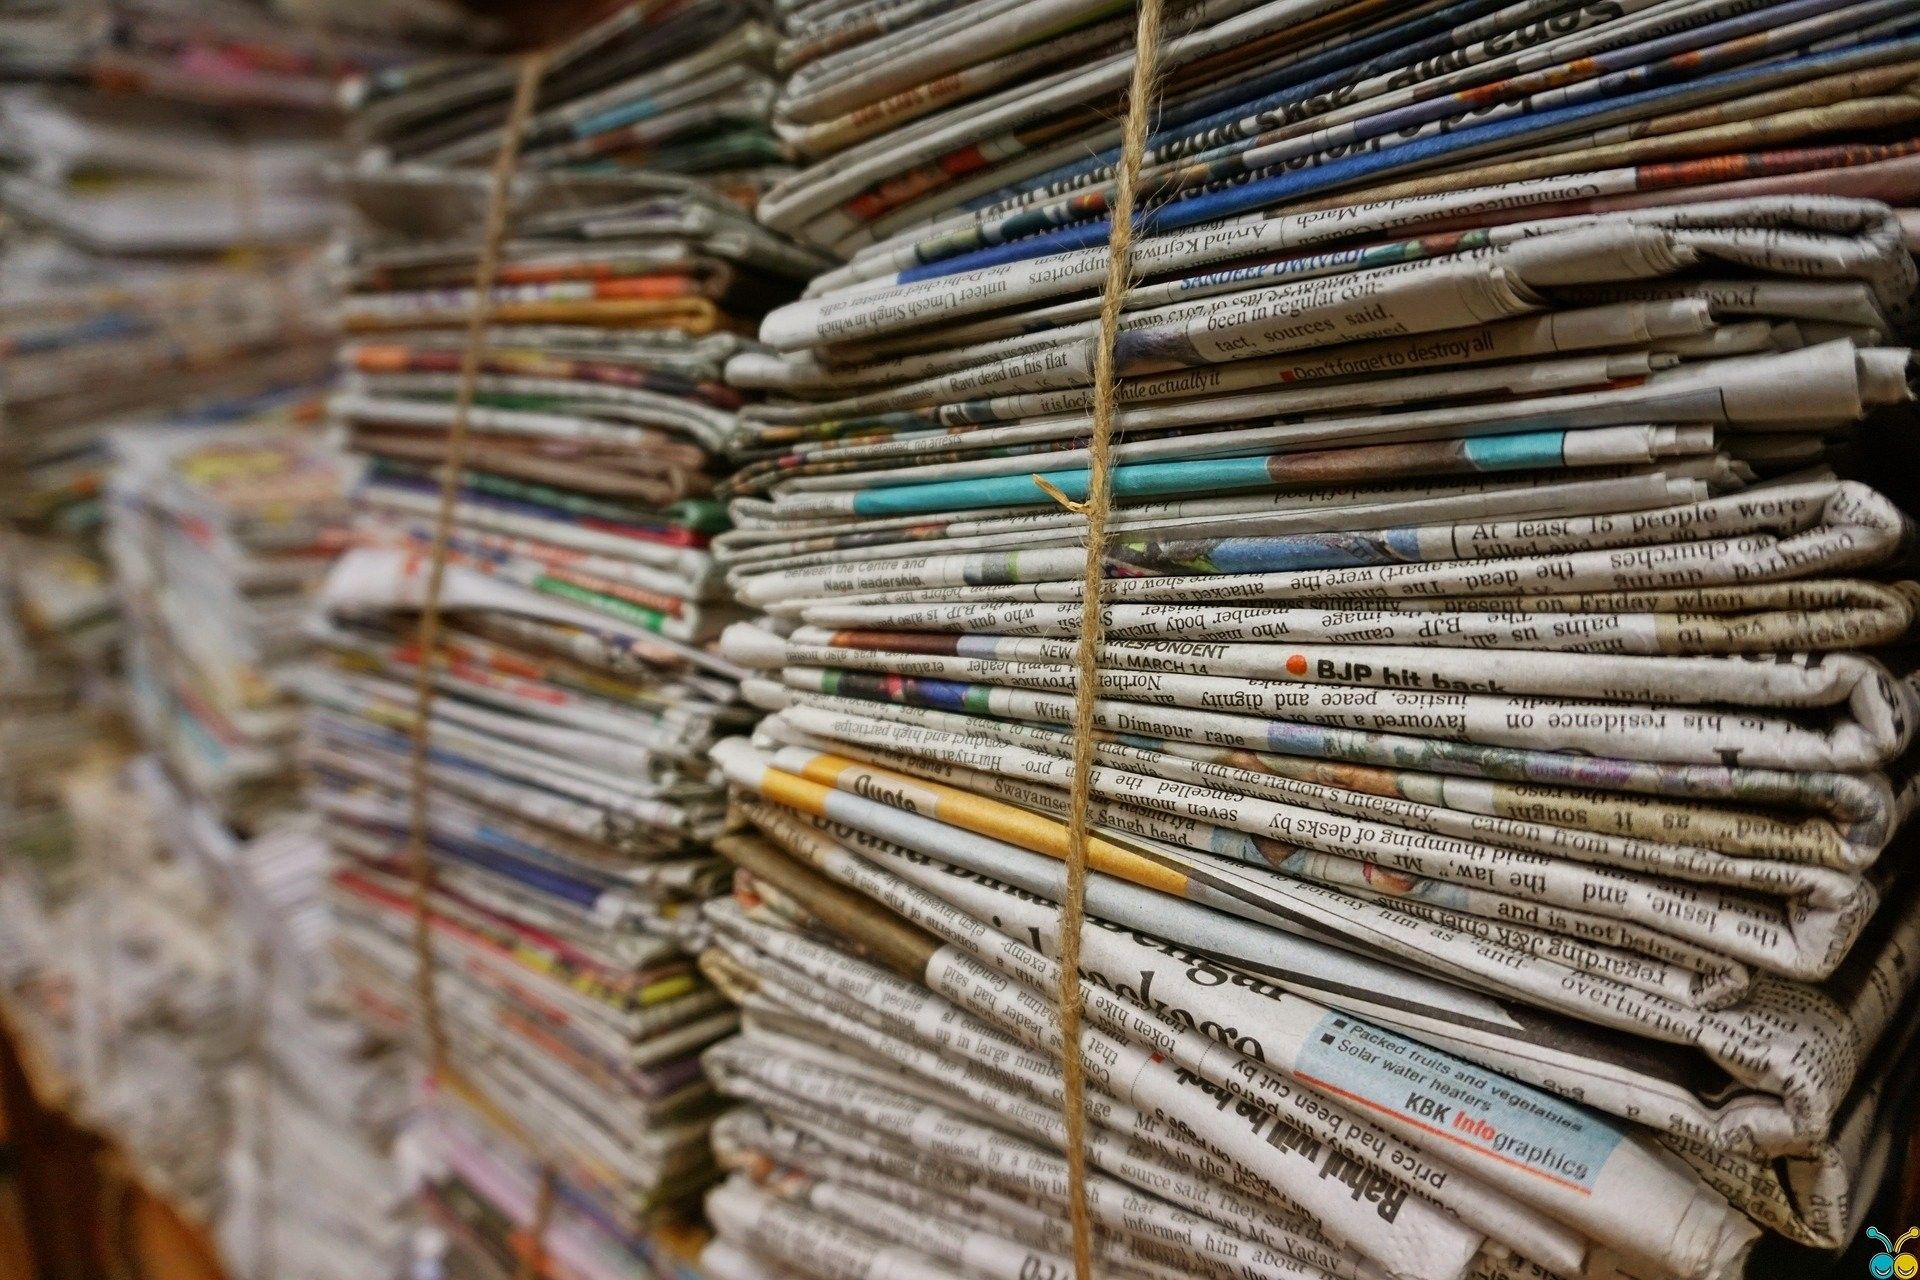 Pandemic-battered community press tries to rebuild from the ashes